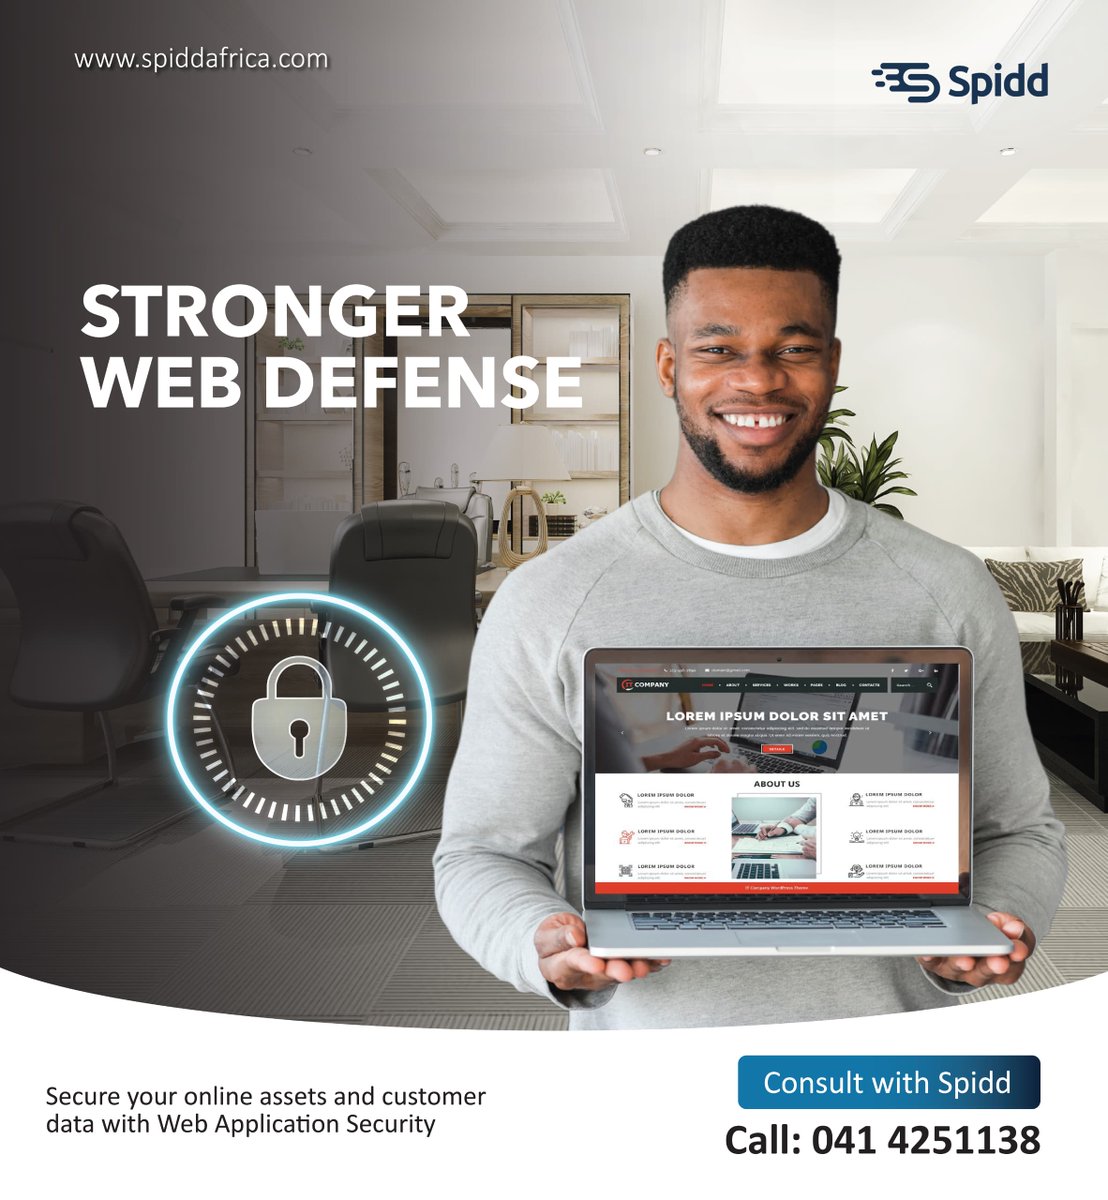 Safeguard your online presence with our top-notch Web Application Security solutions. Protect your website from cyber threats and ensure your customers' data is safe and secure. Stay one step ahead of hackers with Spidd Africa.

Call: 041 425113

#WebSecurity #CyberProtection